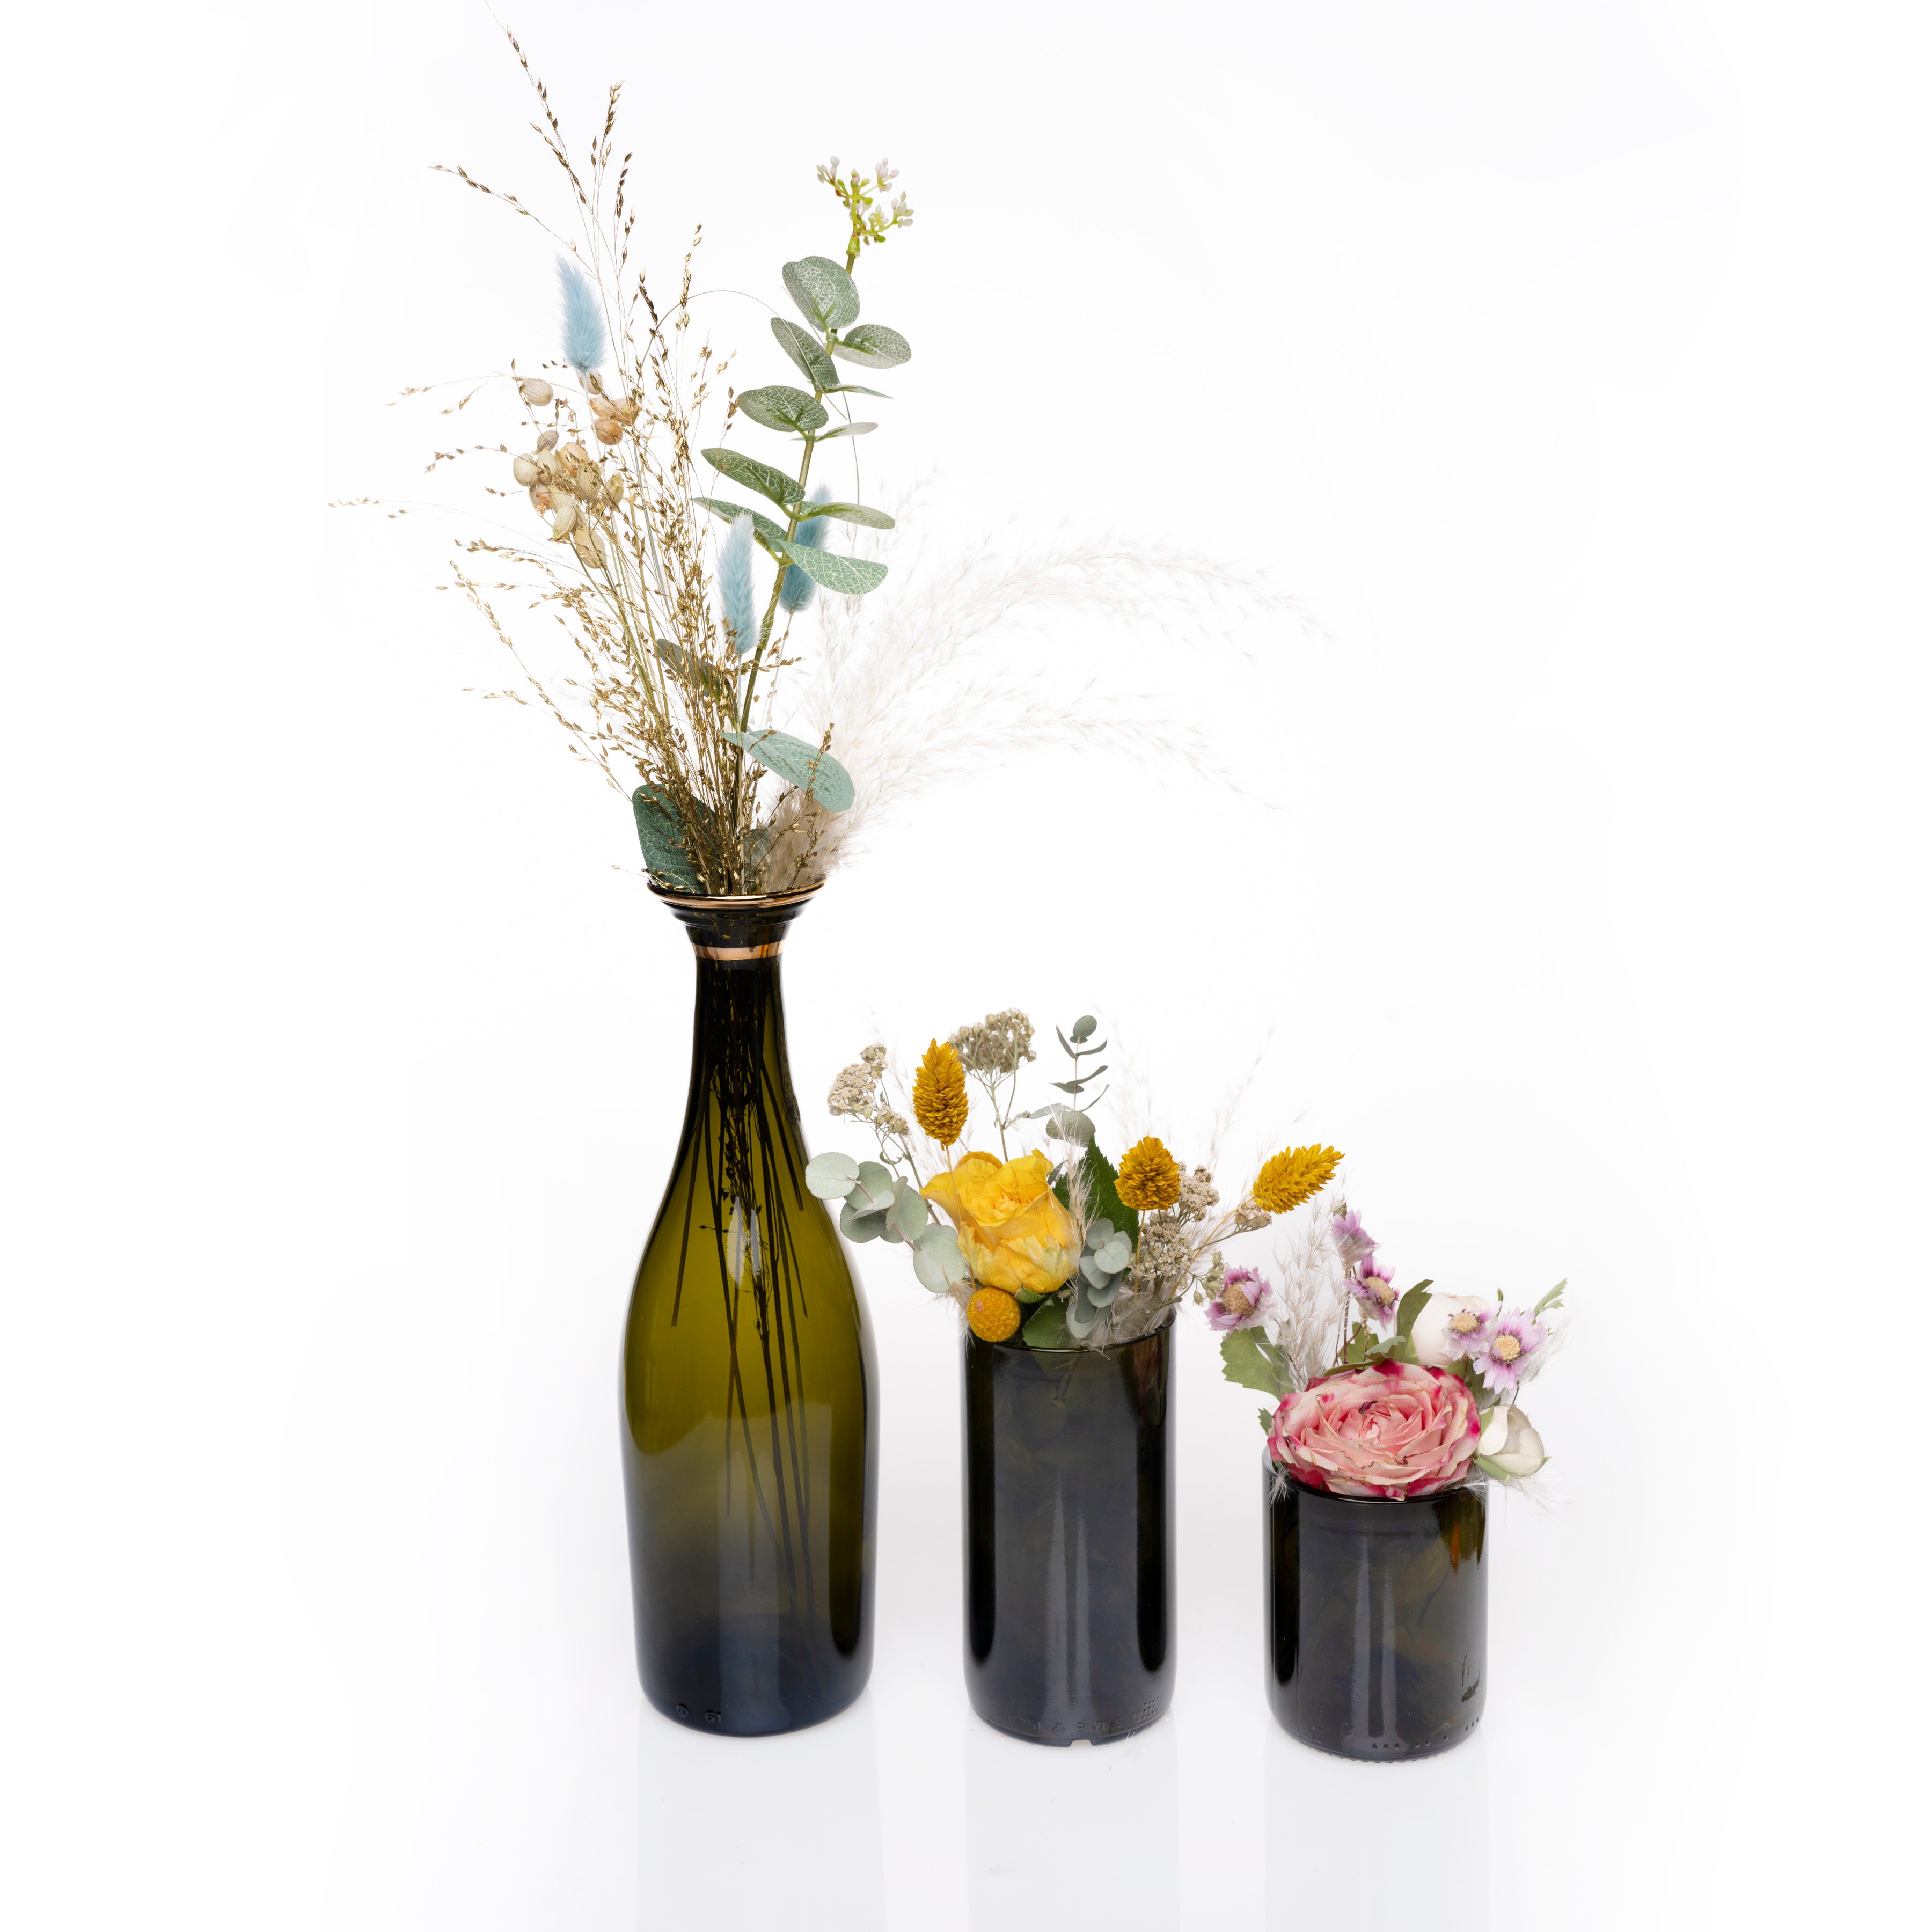 Vase aus Champagnerflasche-personalisiert - Upcycled